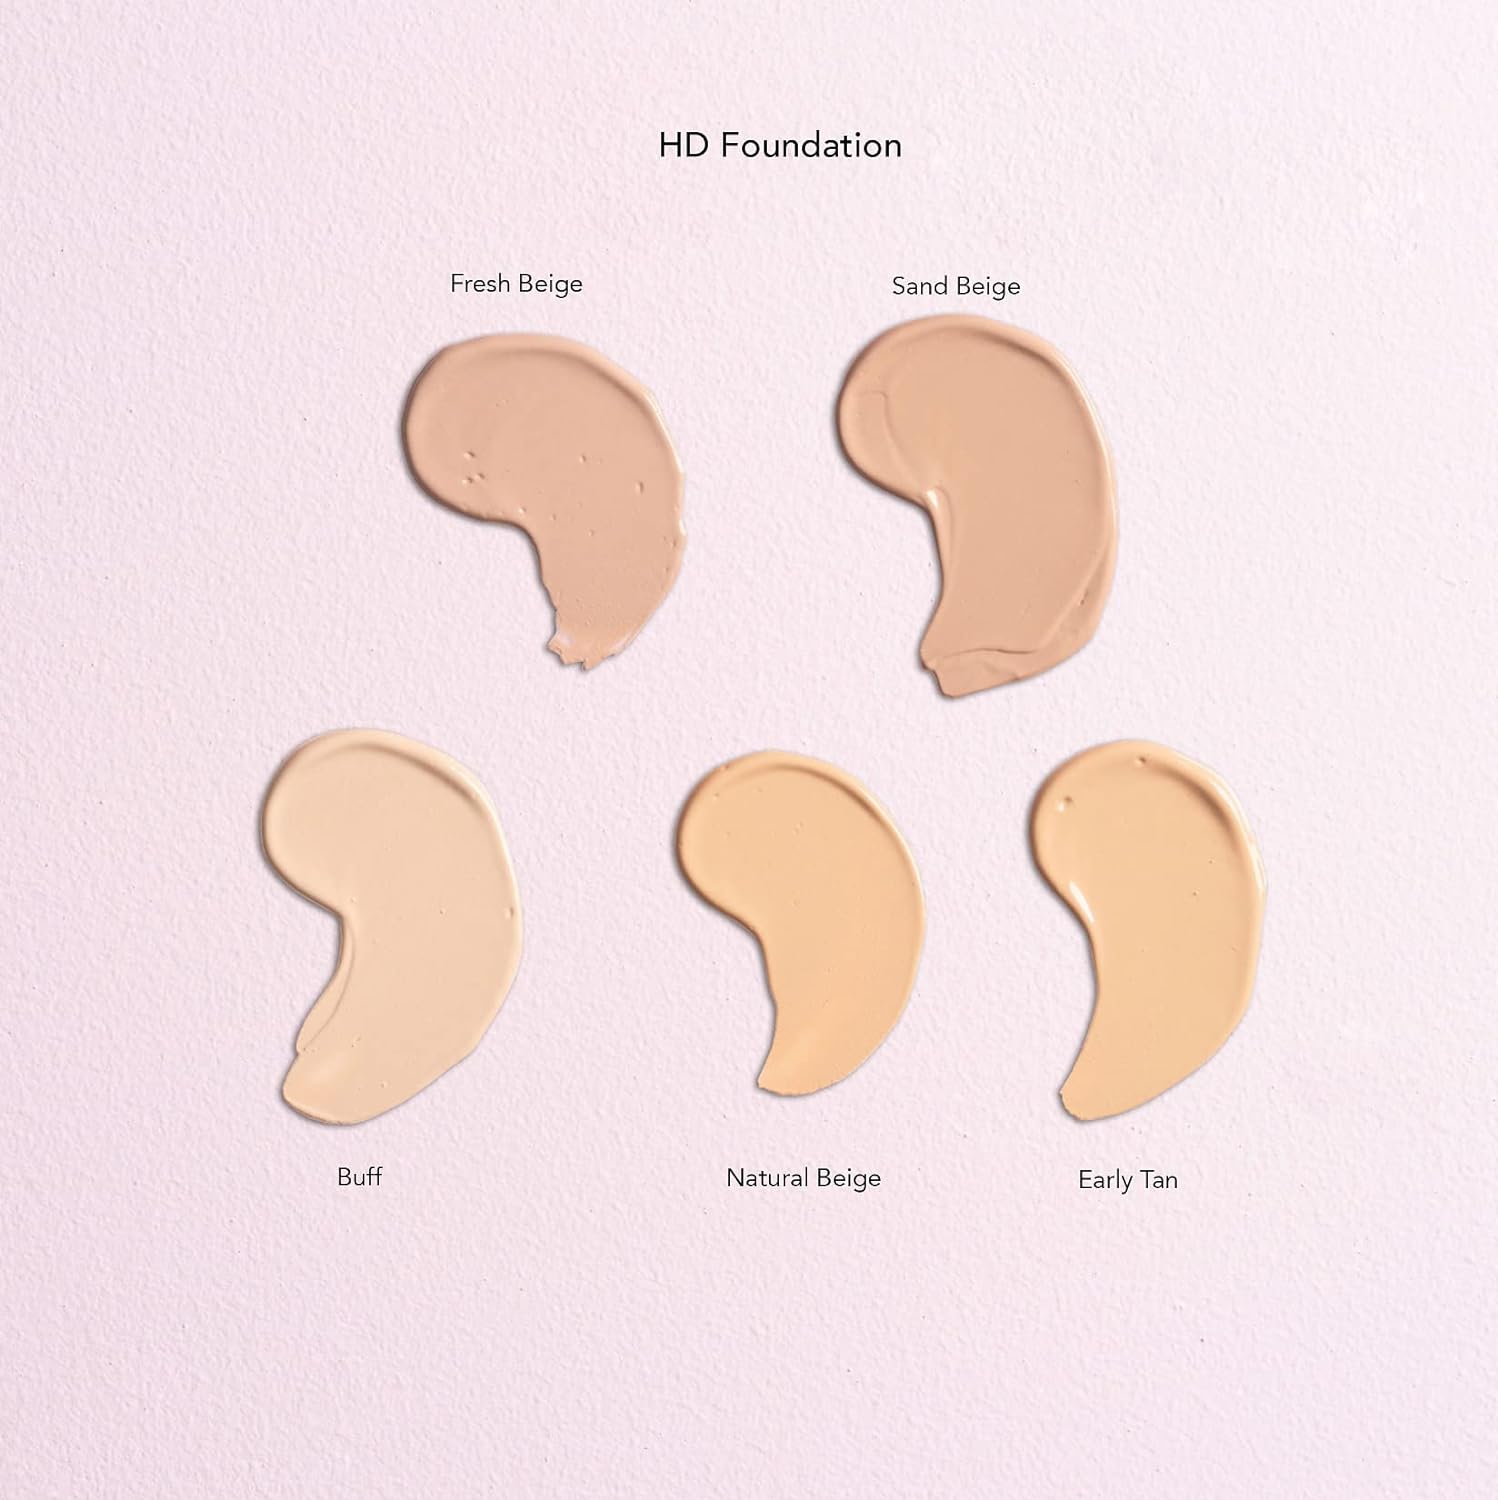 W7 | HD Foundation | Rich and Creamy Matte Formula | Medium Lasting Coverage | Available in 20 Shades | Fresh Beige | Cruelty Free, Vegan Liquid Foundation Makeup by W7 Cosmetics : Beauty & Personal Care